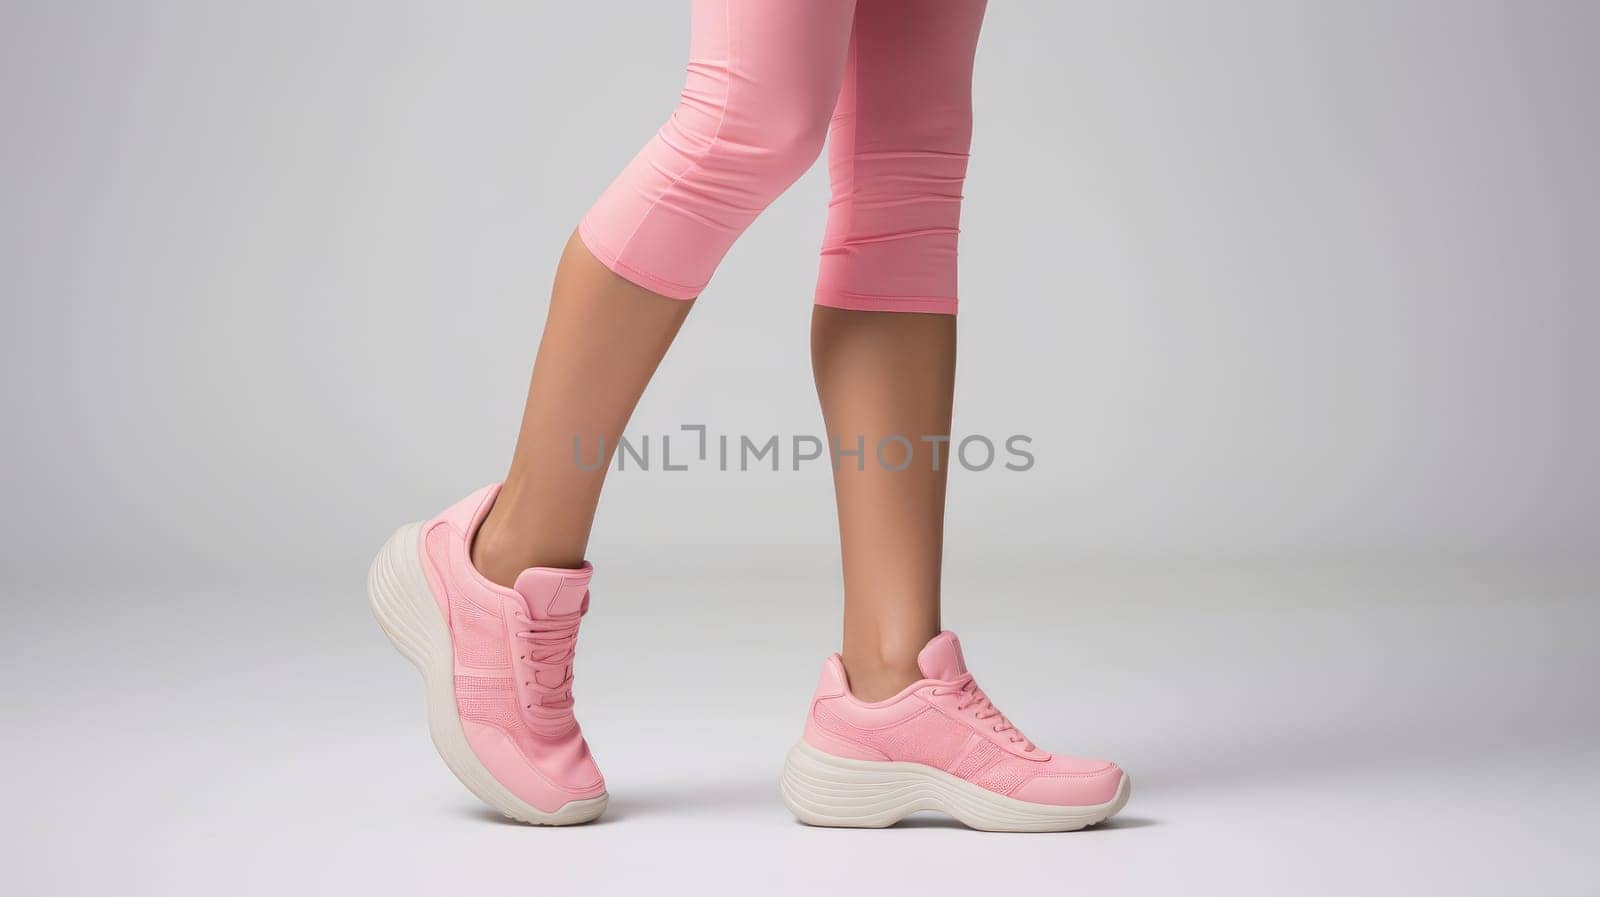 Subtle Comfort. Woman Choosing Elegant Sporty Shoes. Athletic Elegance. Unidentified Woman Picks Comfy Sneakers. Stylish Selection. Pink Sneakers for Comfort and Elegance by ViShark